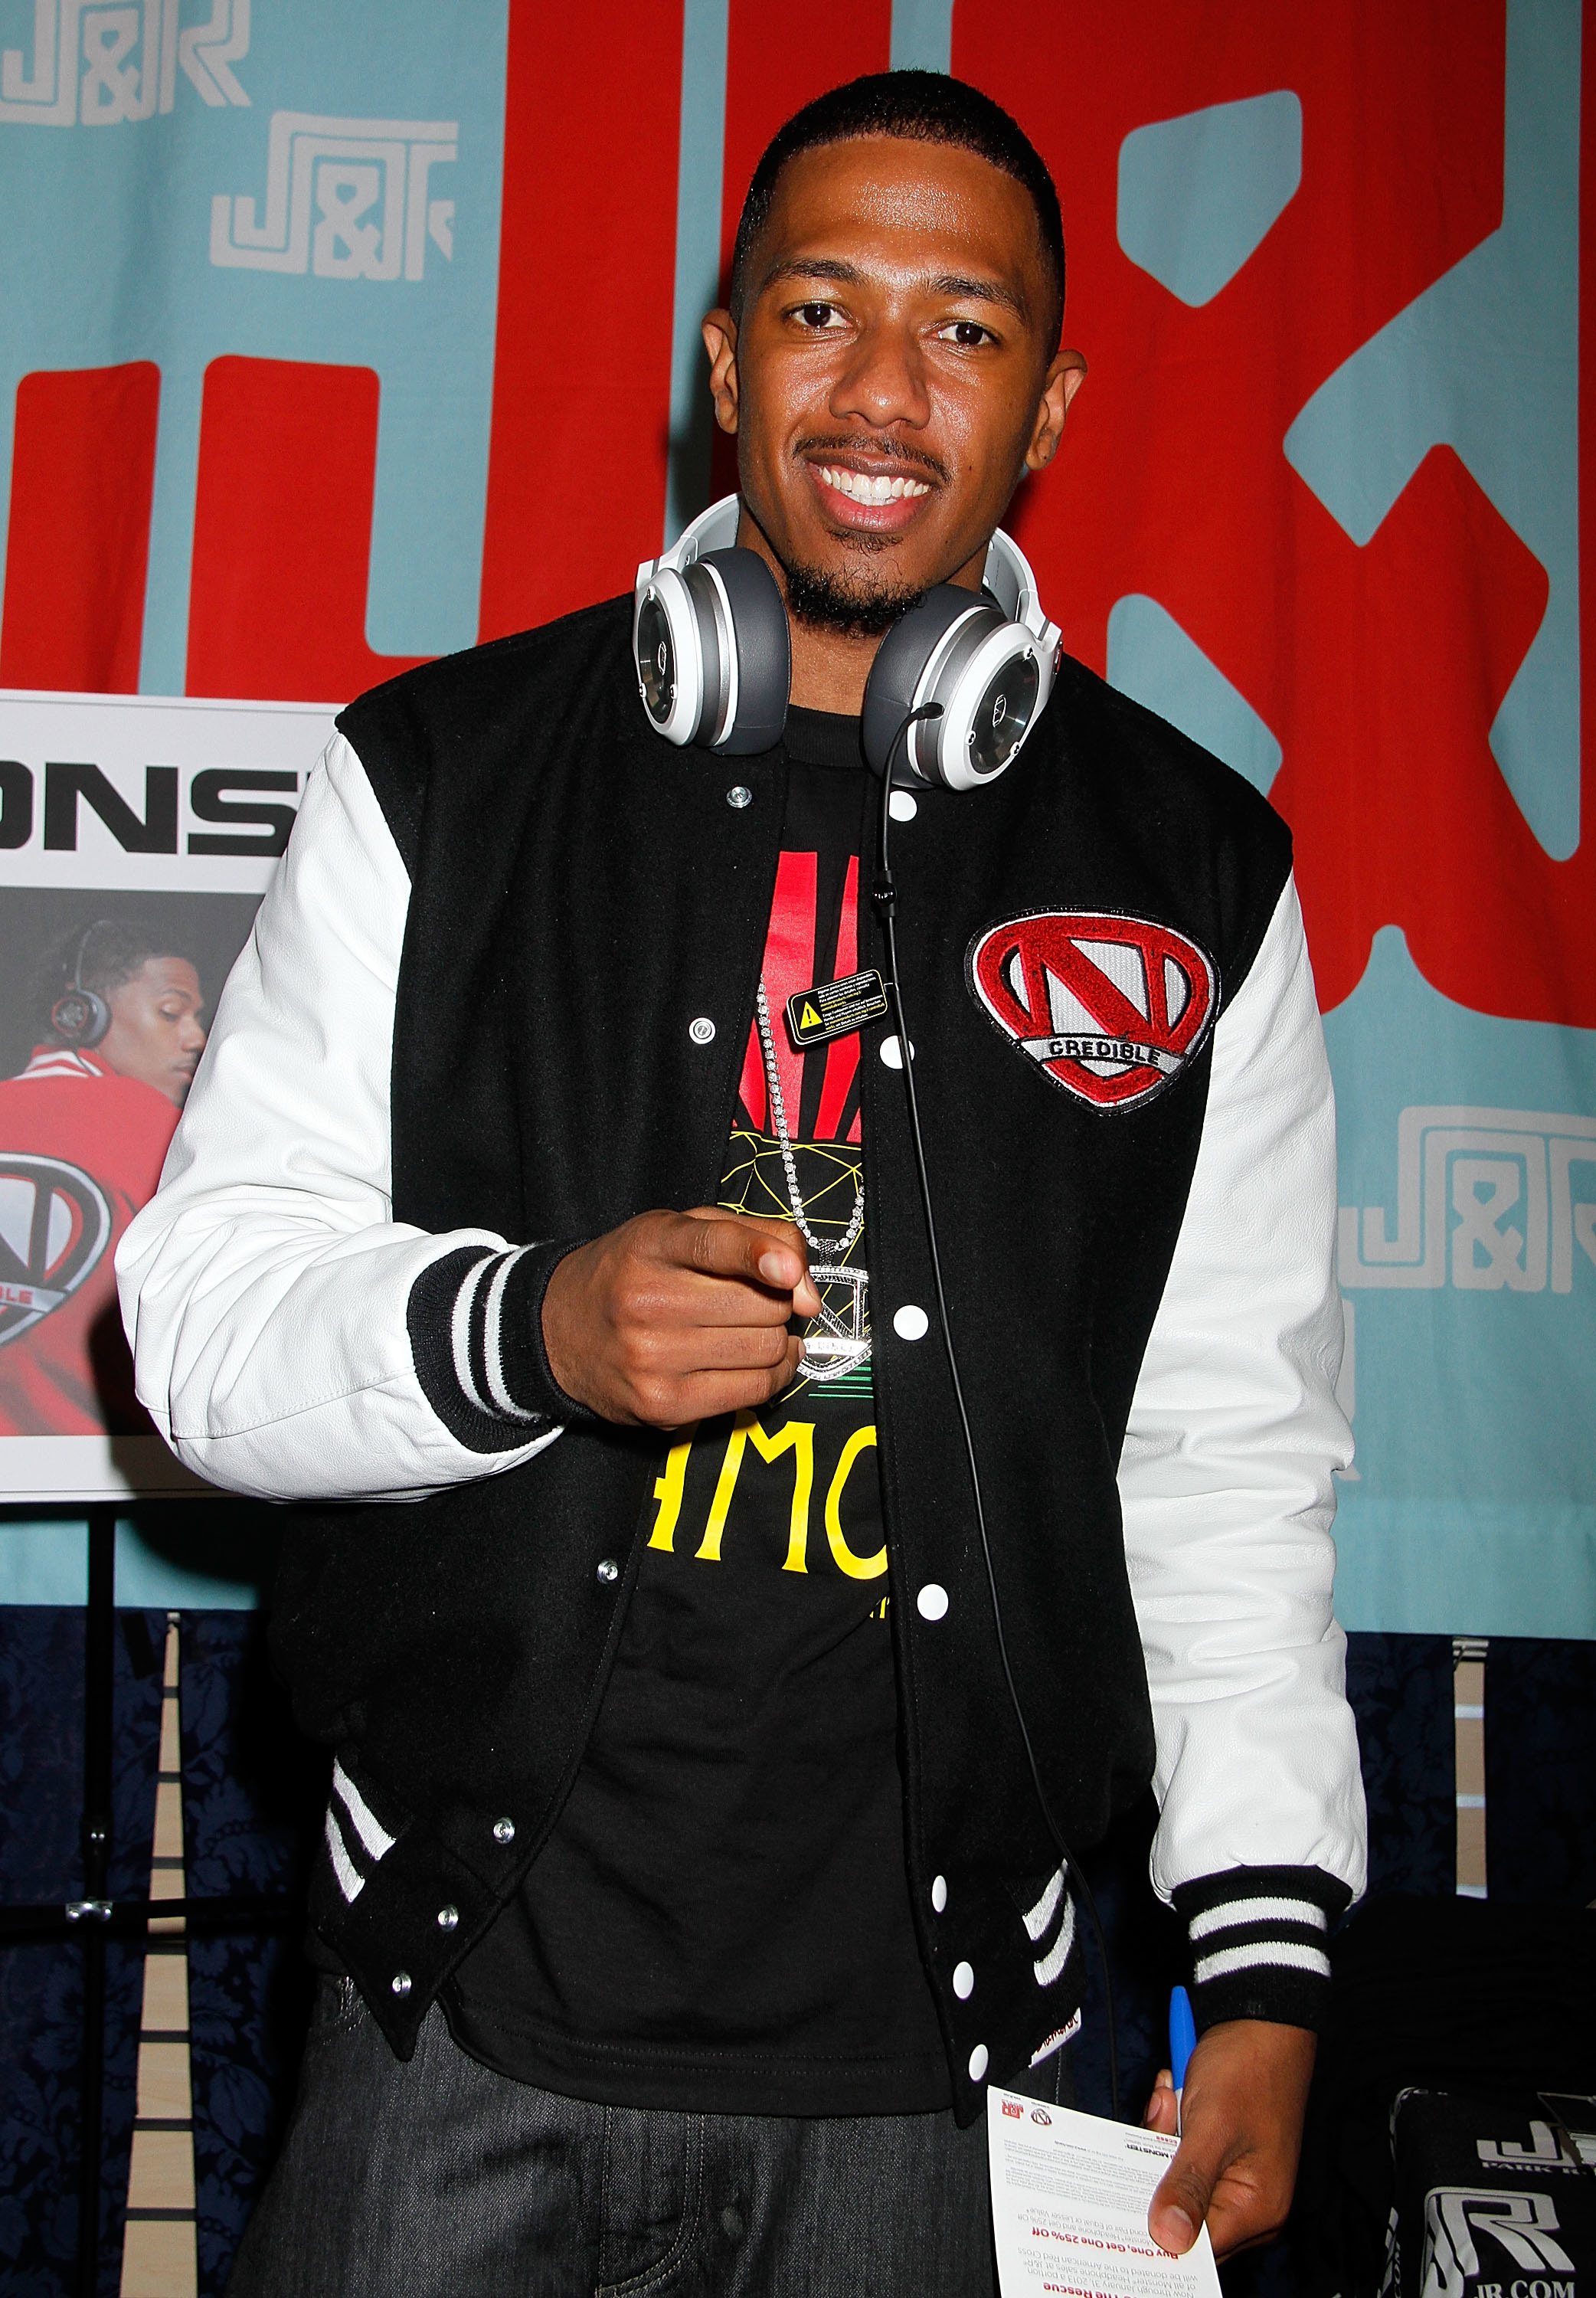 Nick Cannon smiling and pointing